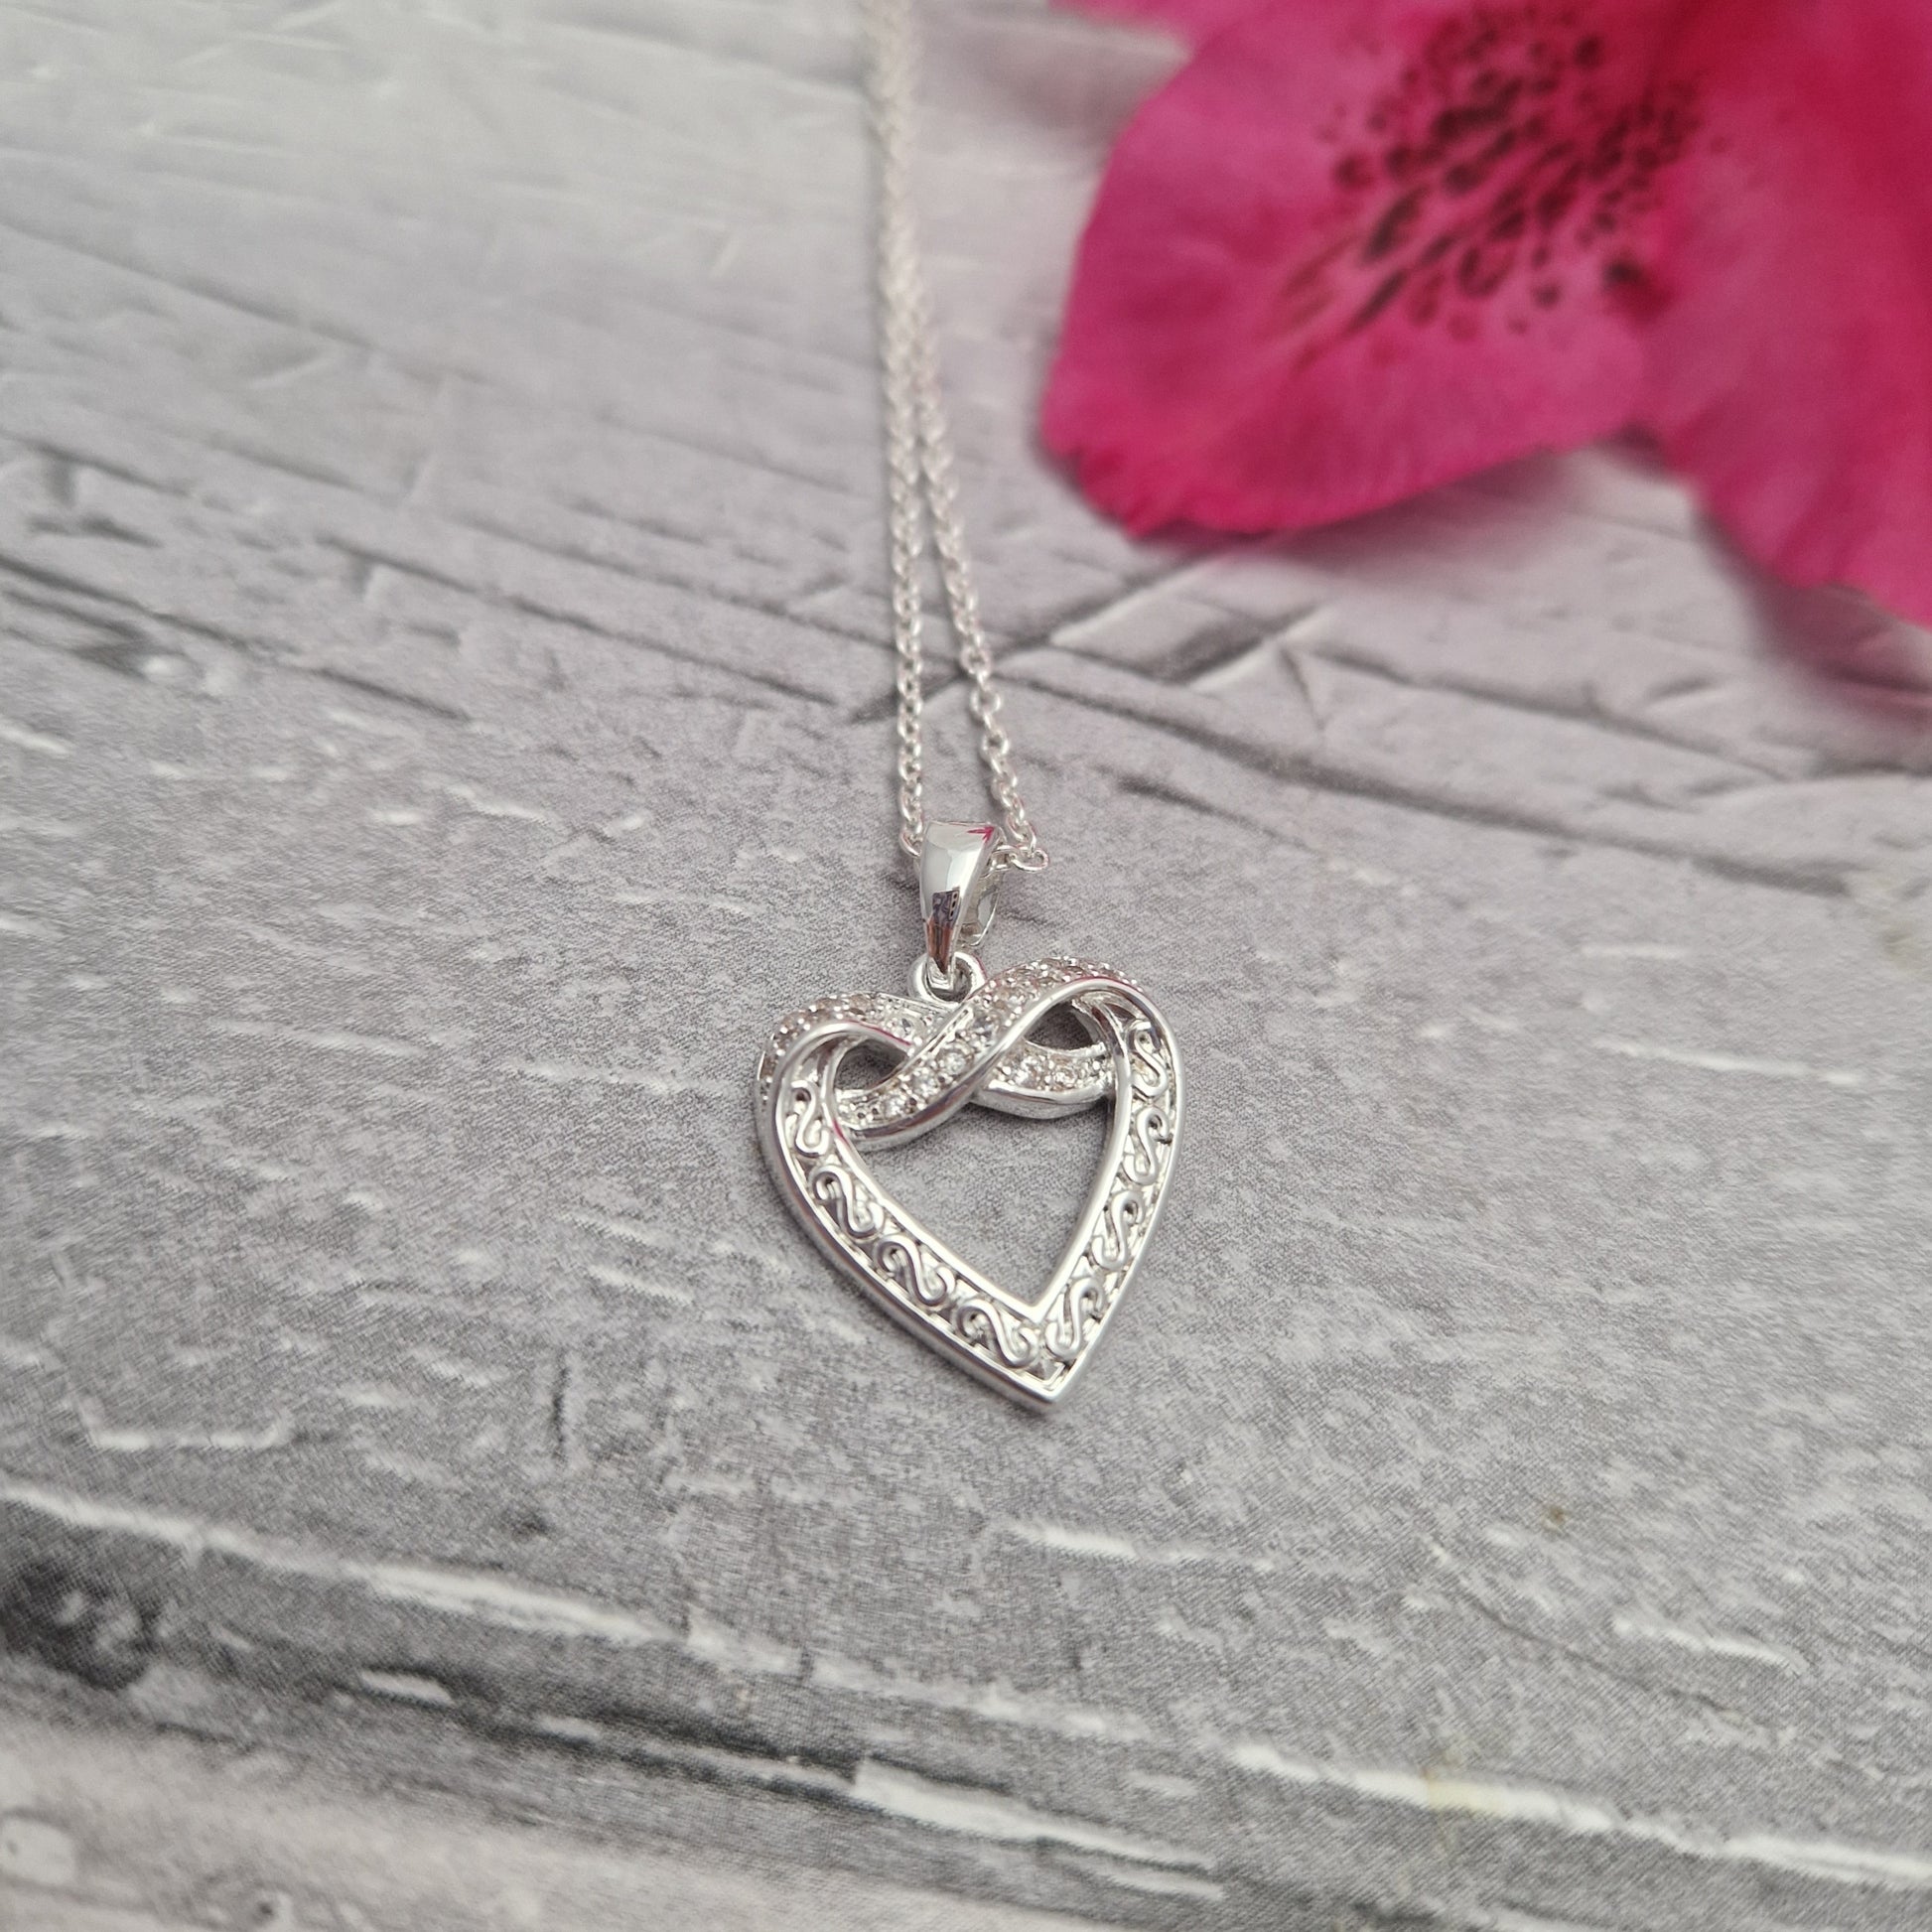 Twisted love heart pendant on a silver plated necklace.